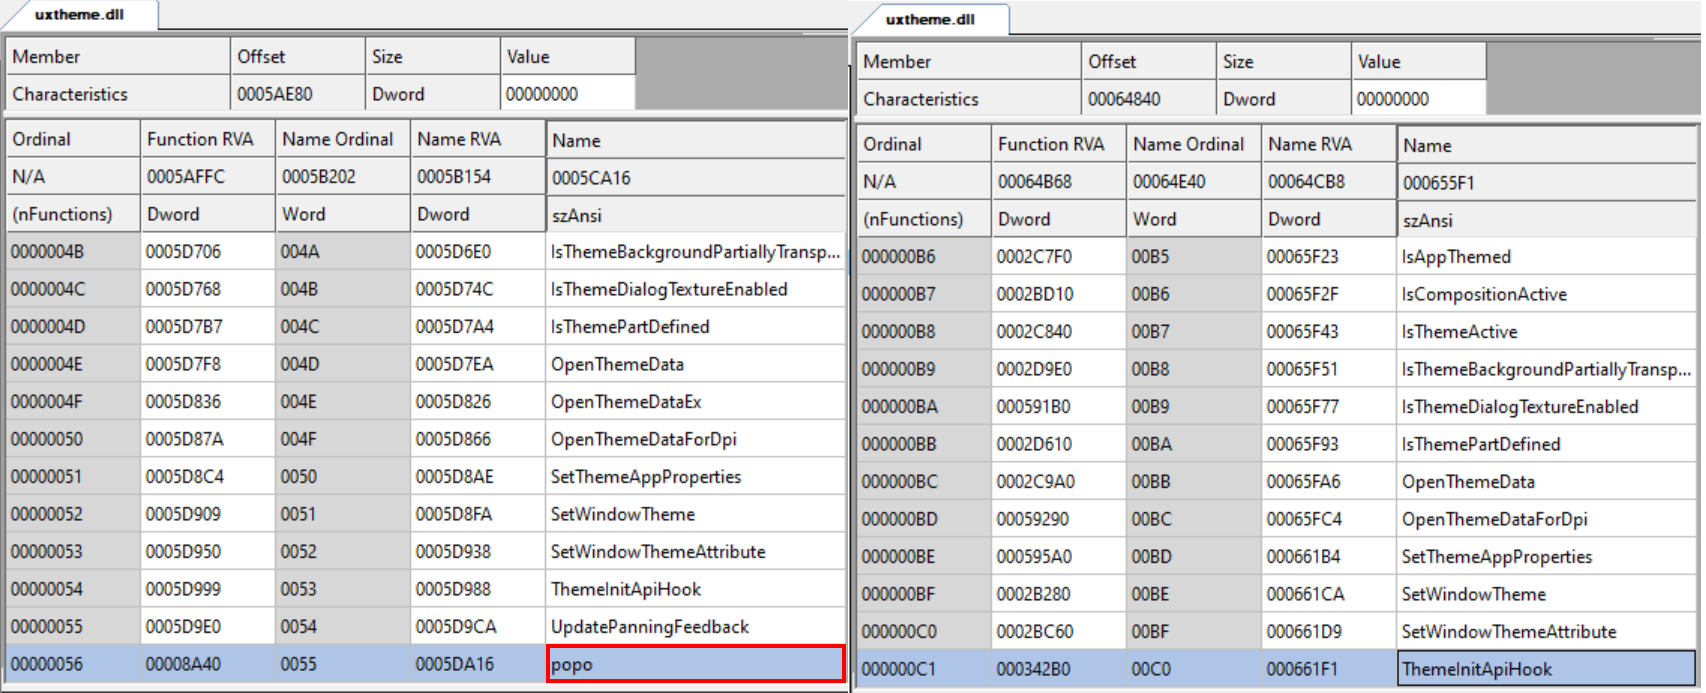 Comparing the export table of the malicious proxied DLL (left) and the original DLL (right) reveals that same functions, with the addition of one additional exported function on the malicious side: popo (outlined in red in the screenshot). 